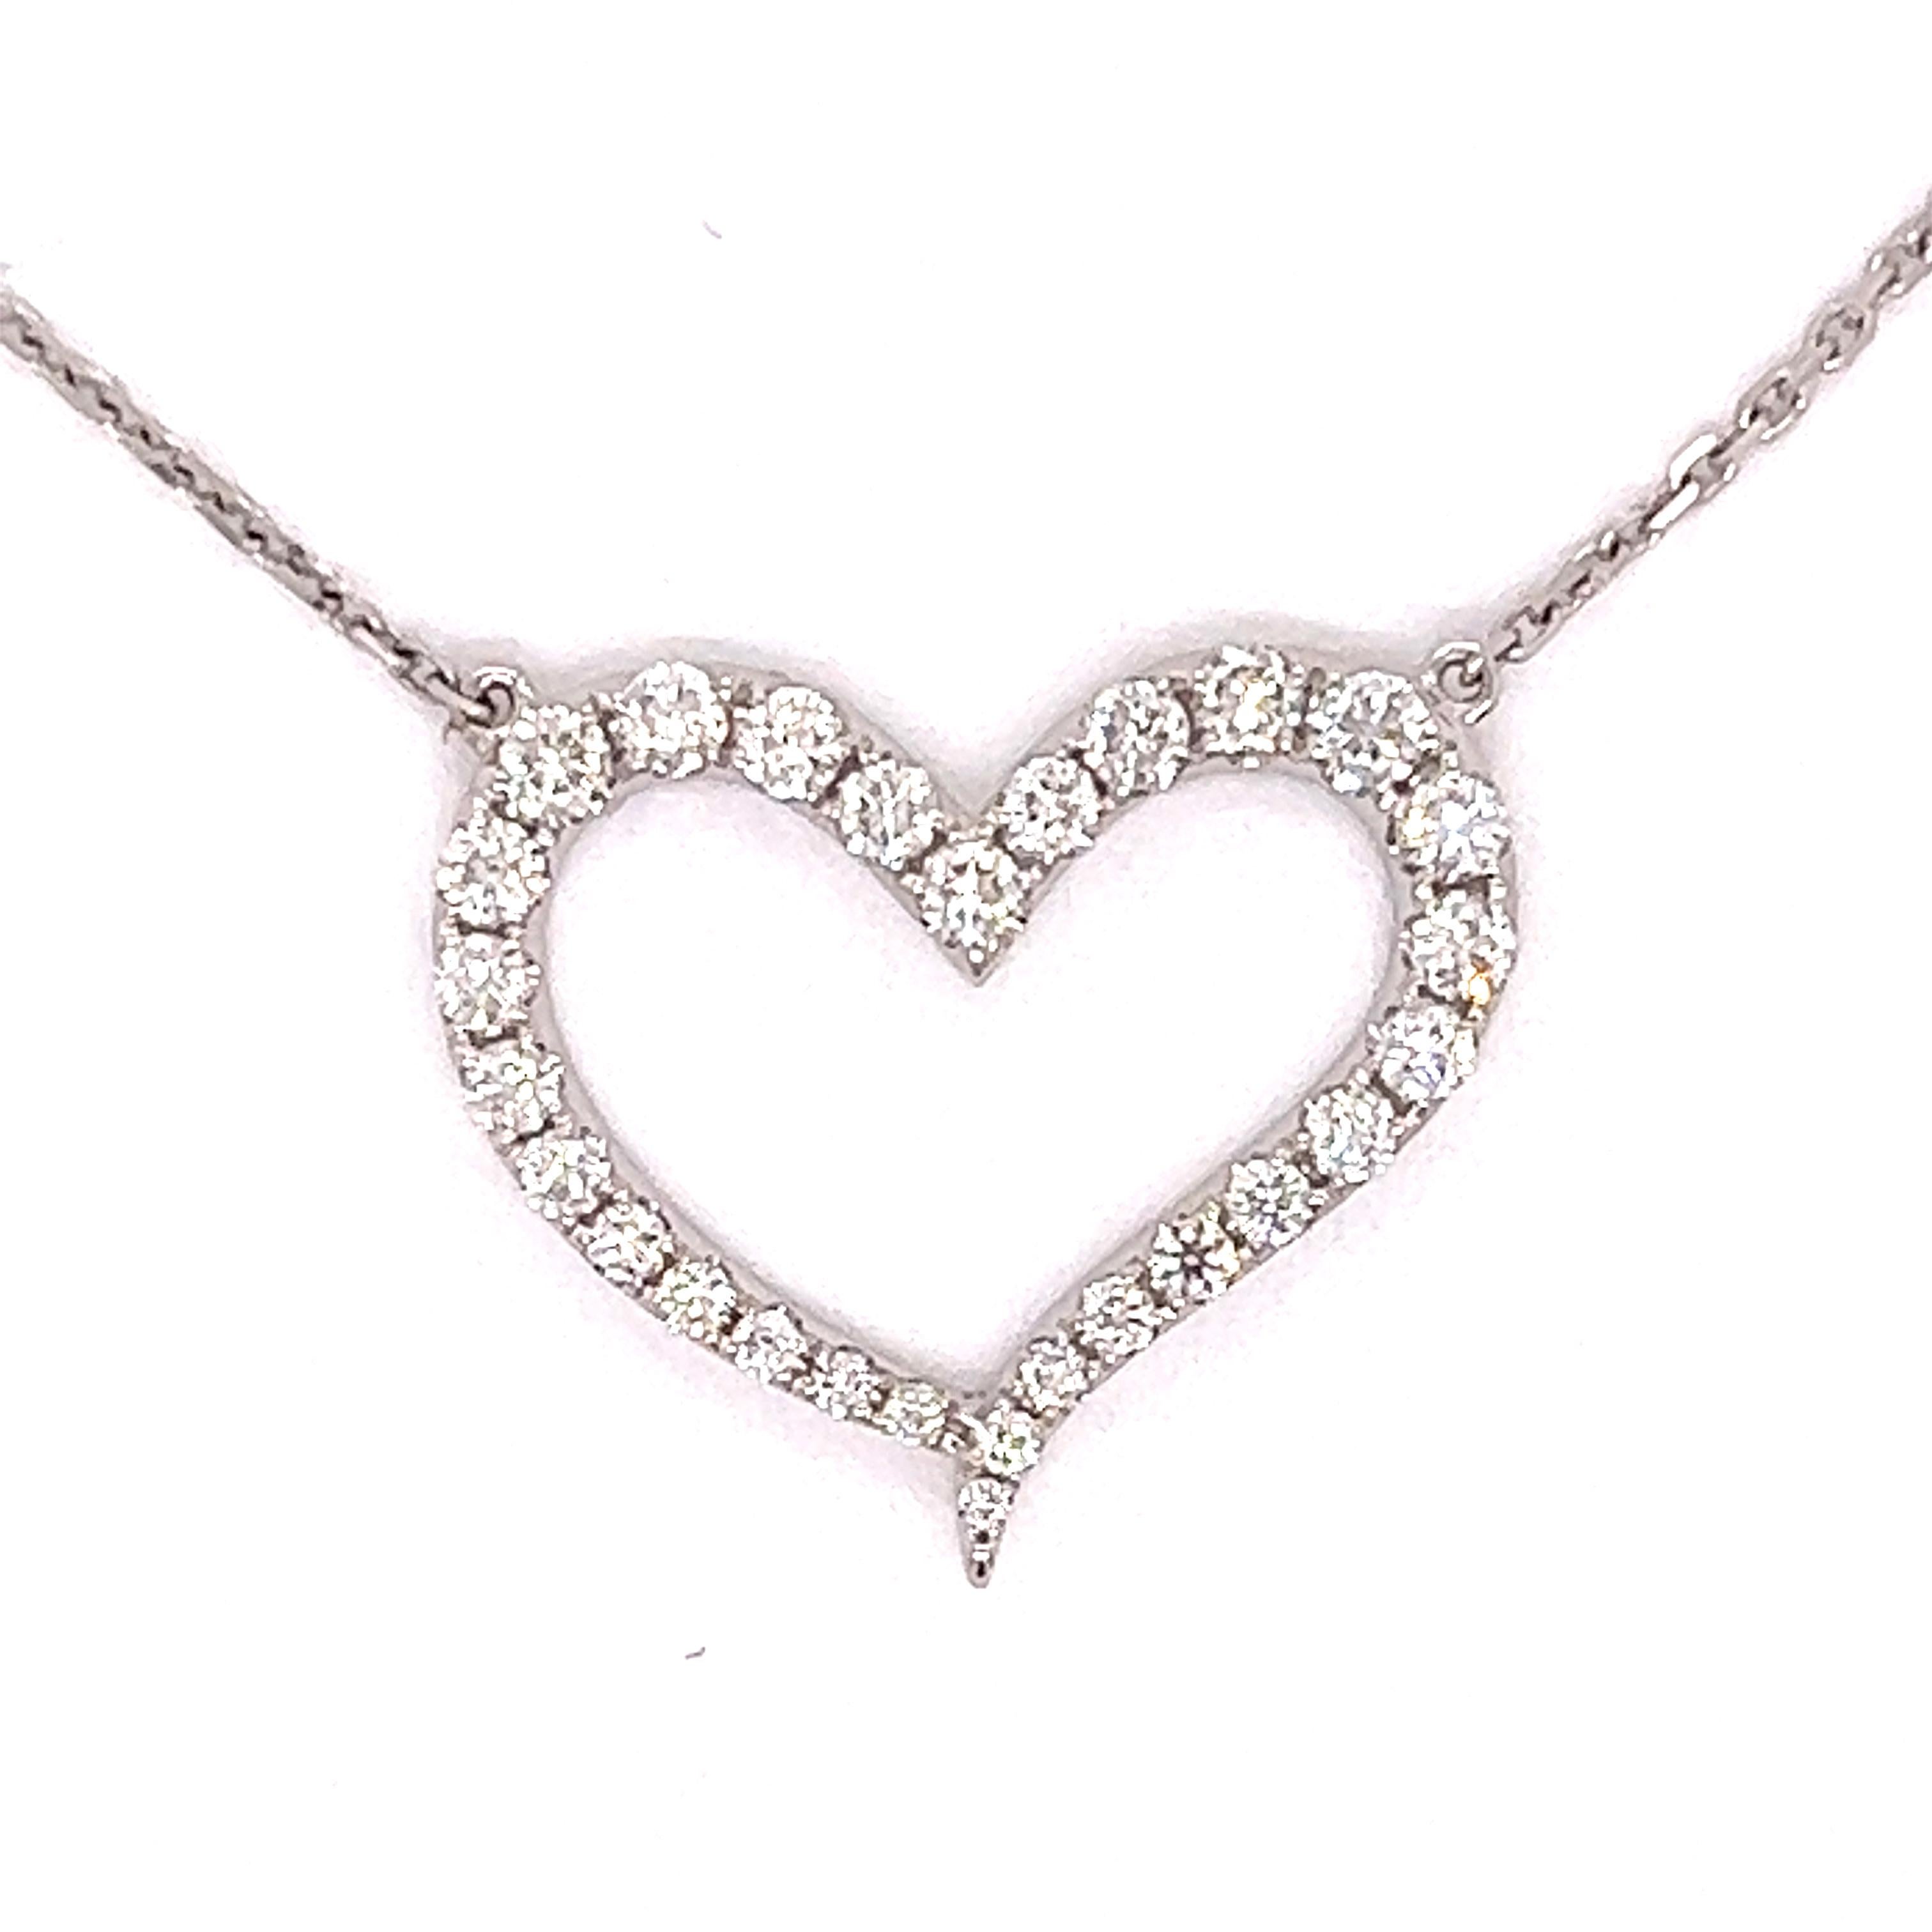 Beautiful and classic heart diamond necklace.  There are 28 diamonds with  .74 cttw.  These diamonds are of SI clarity and H-I color.  This is 4 grams of 18kt white gold.  The heart is stationary and does not slide.  This necklace is 18